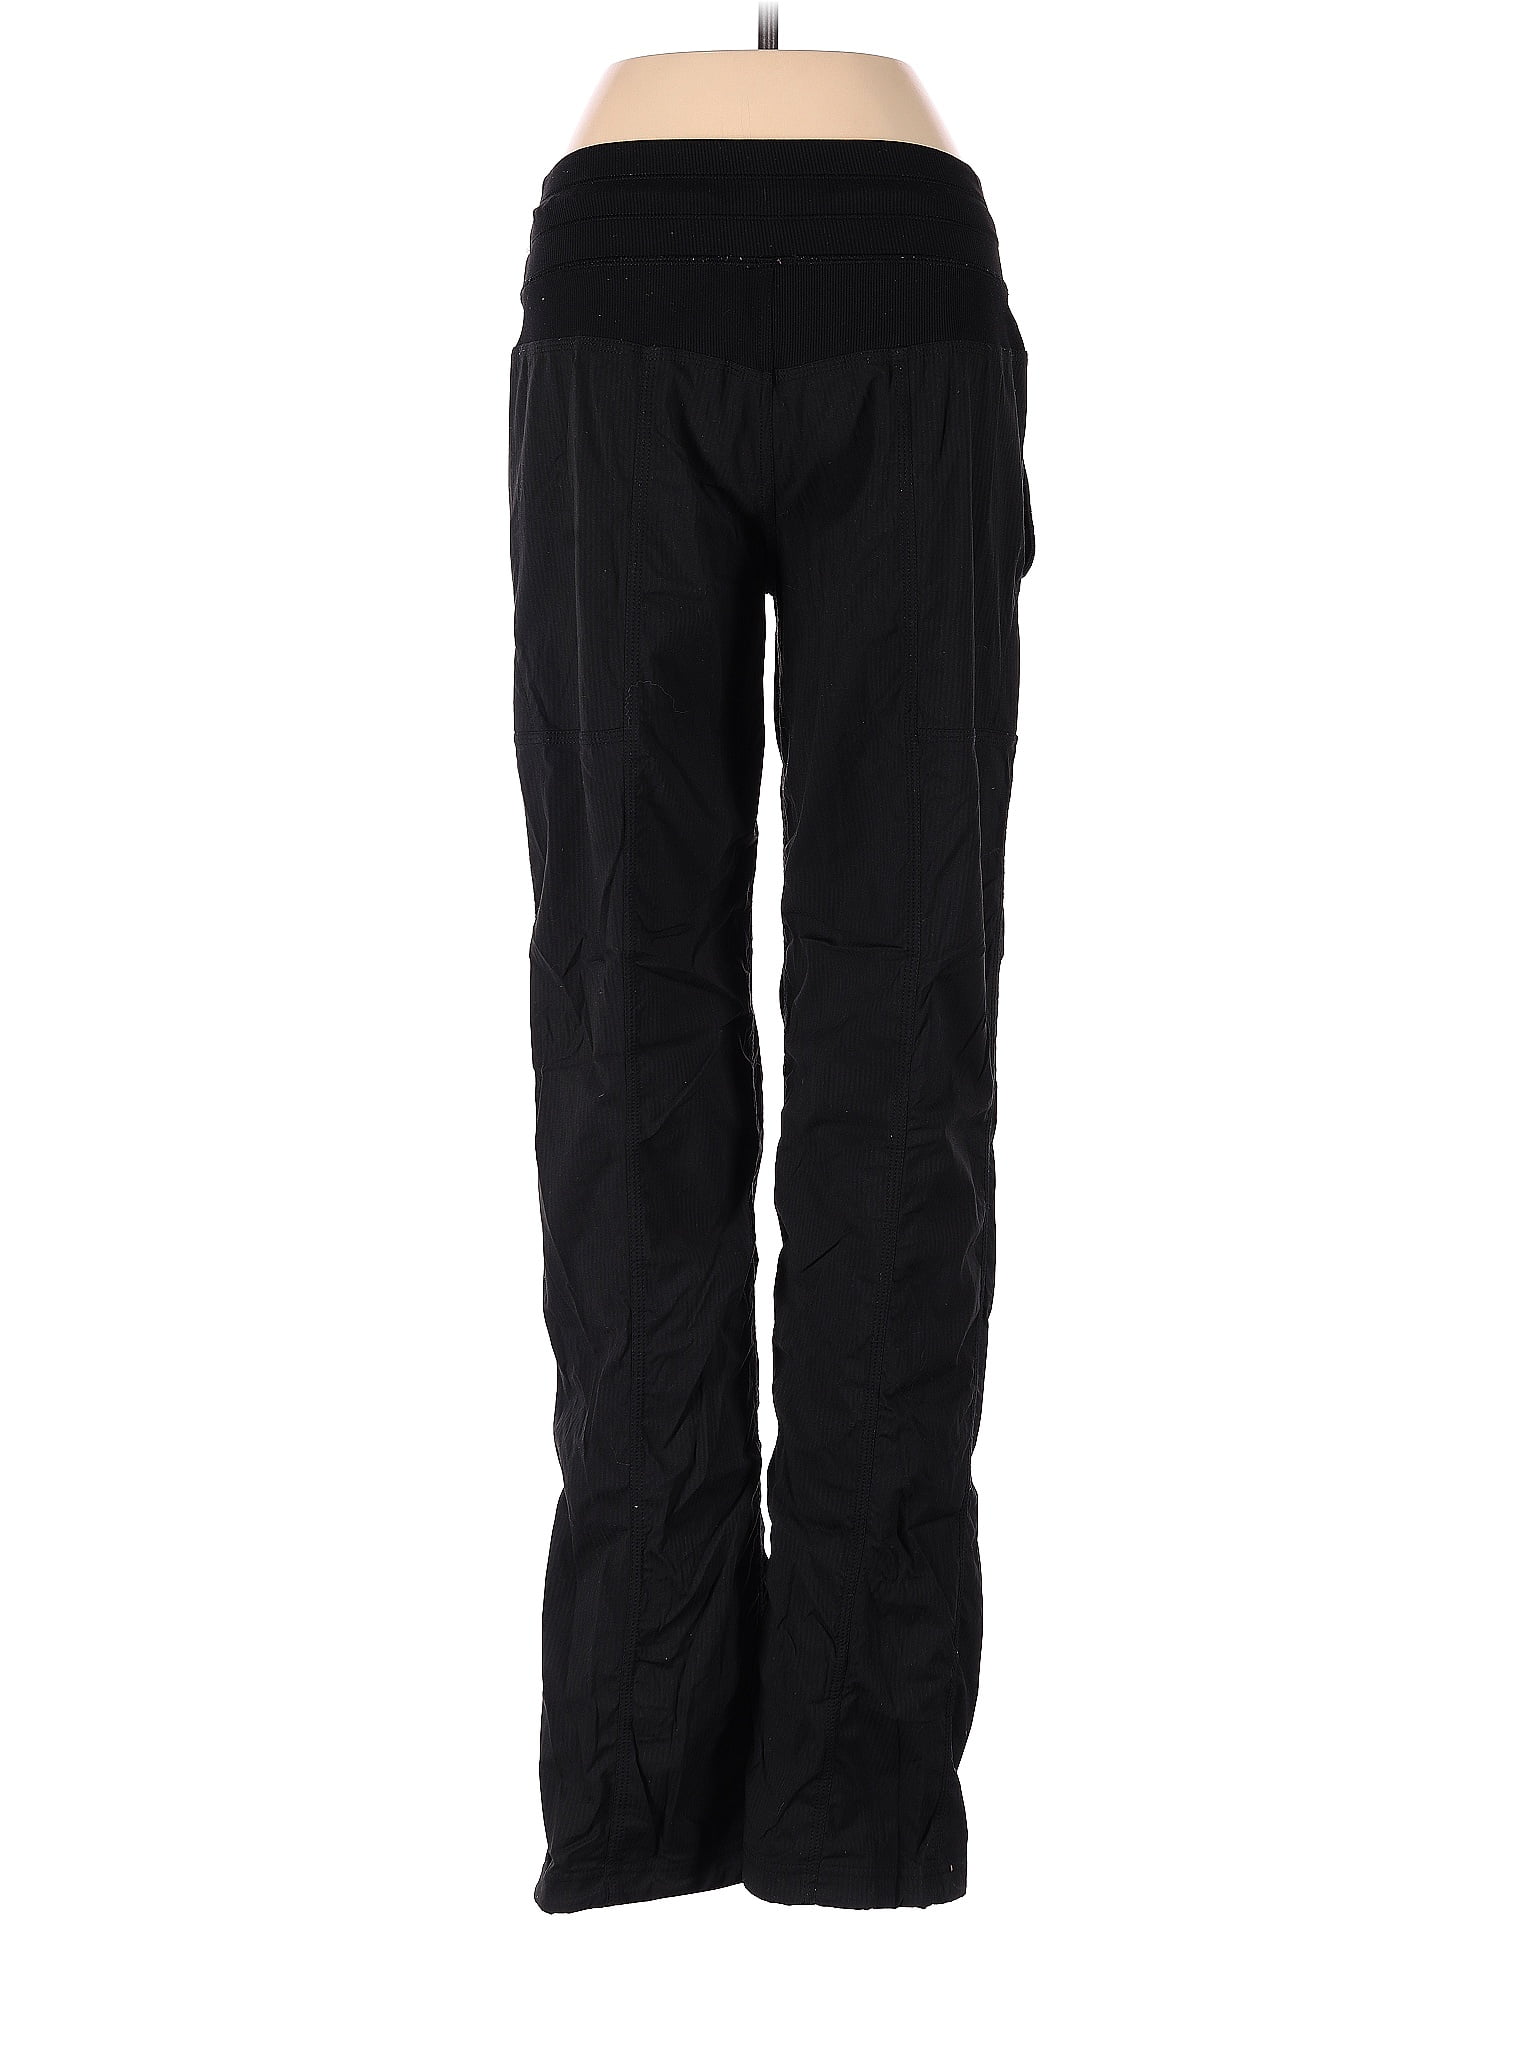 Lululemon Athletica Solid Black Casual Pants Size 2 - 52% off